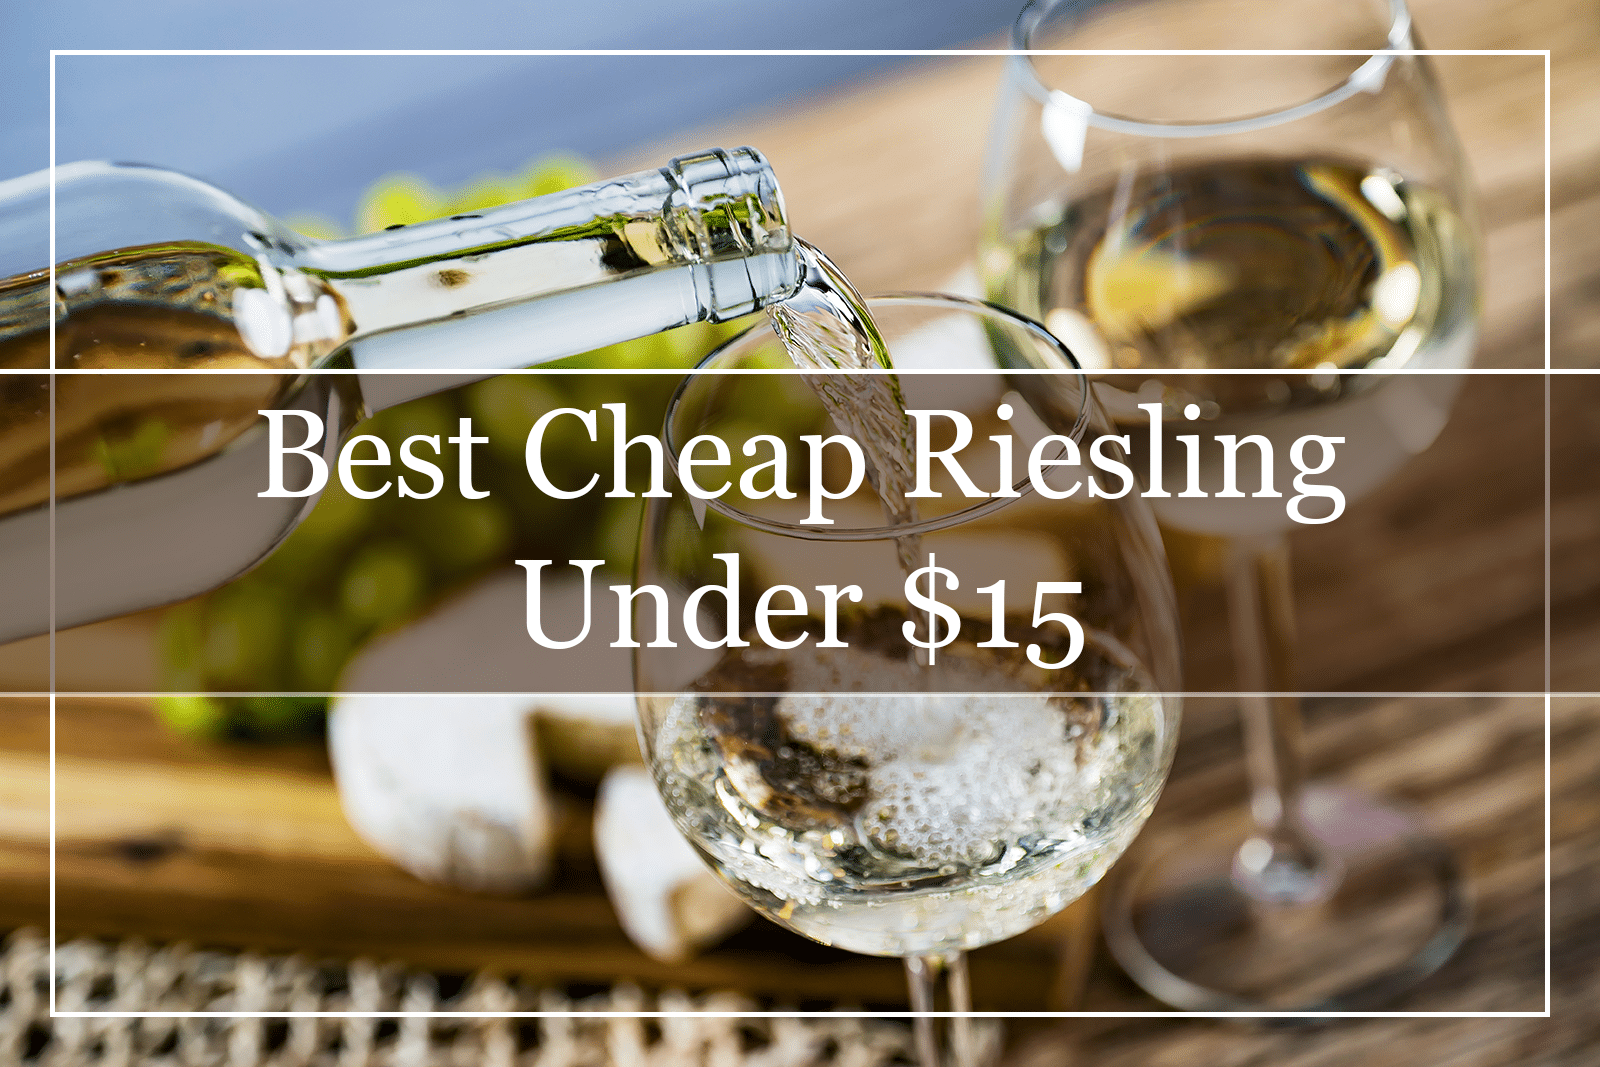 10 Best Cheap Riesling Wines Under $15 (2022)